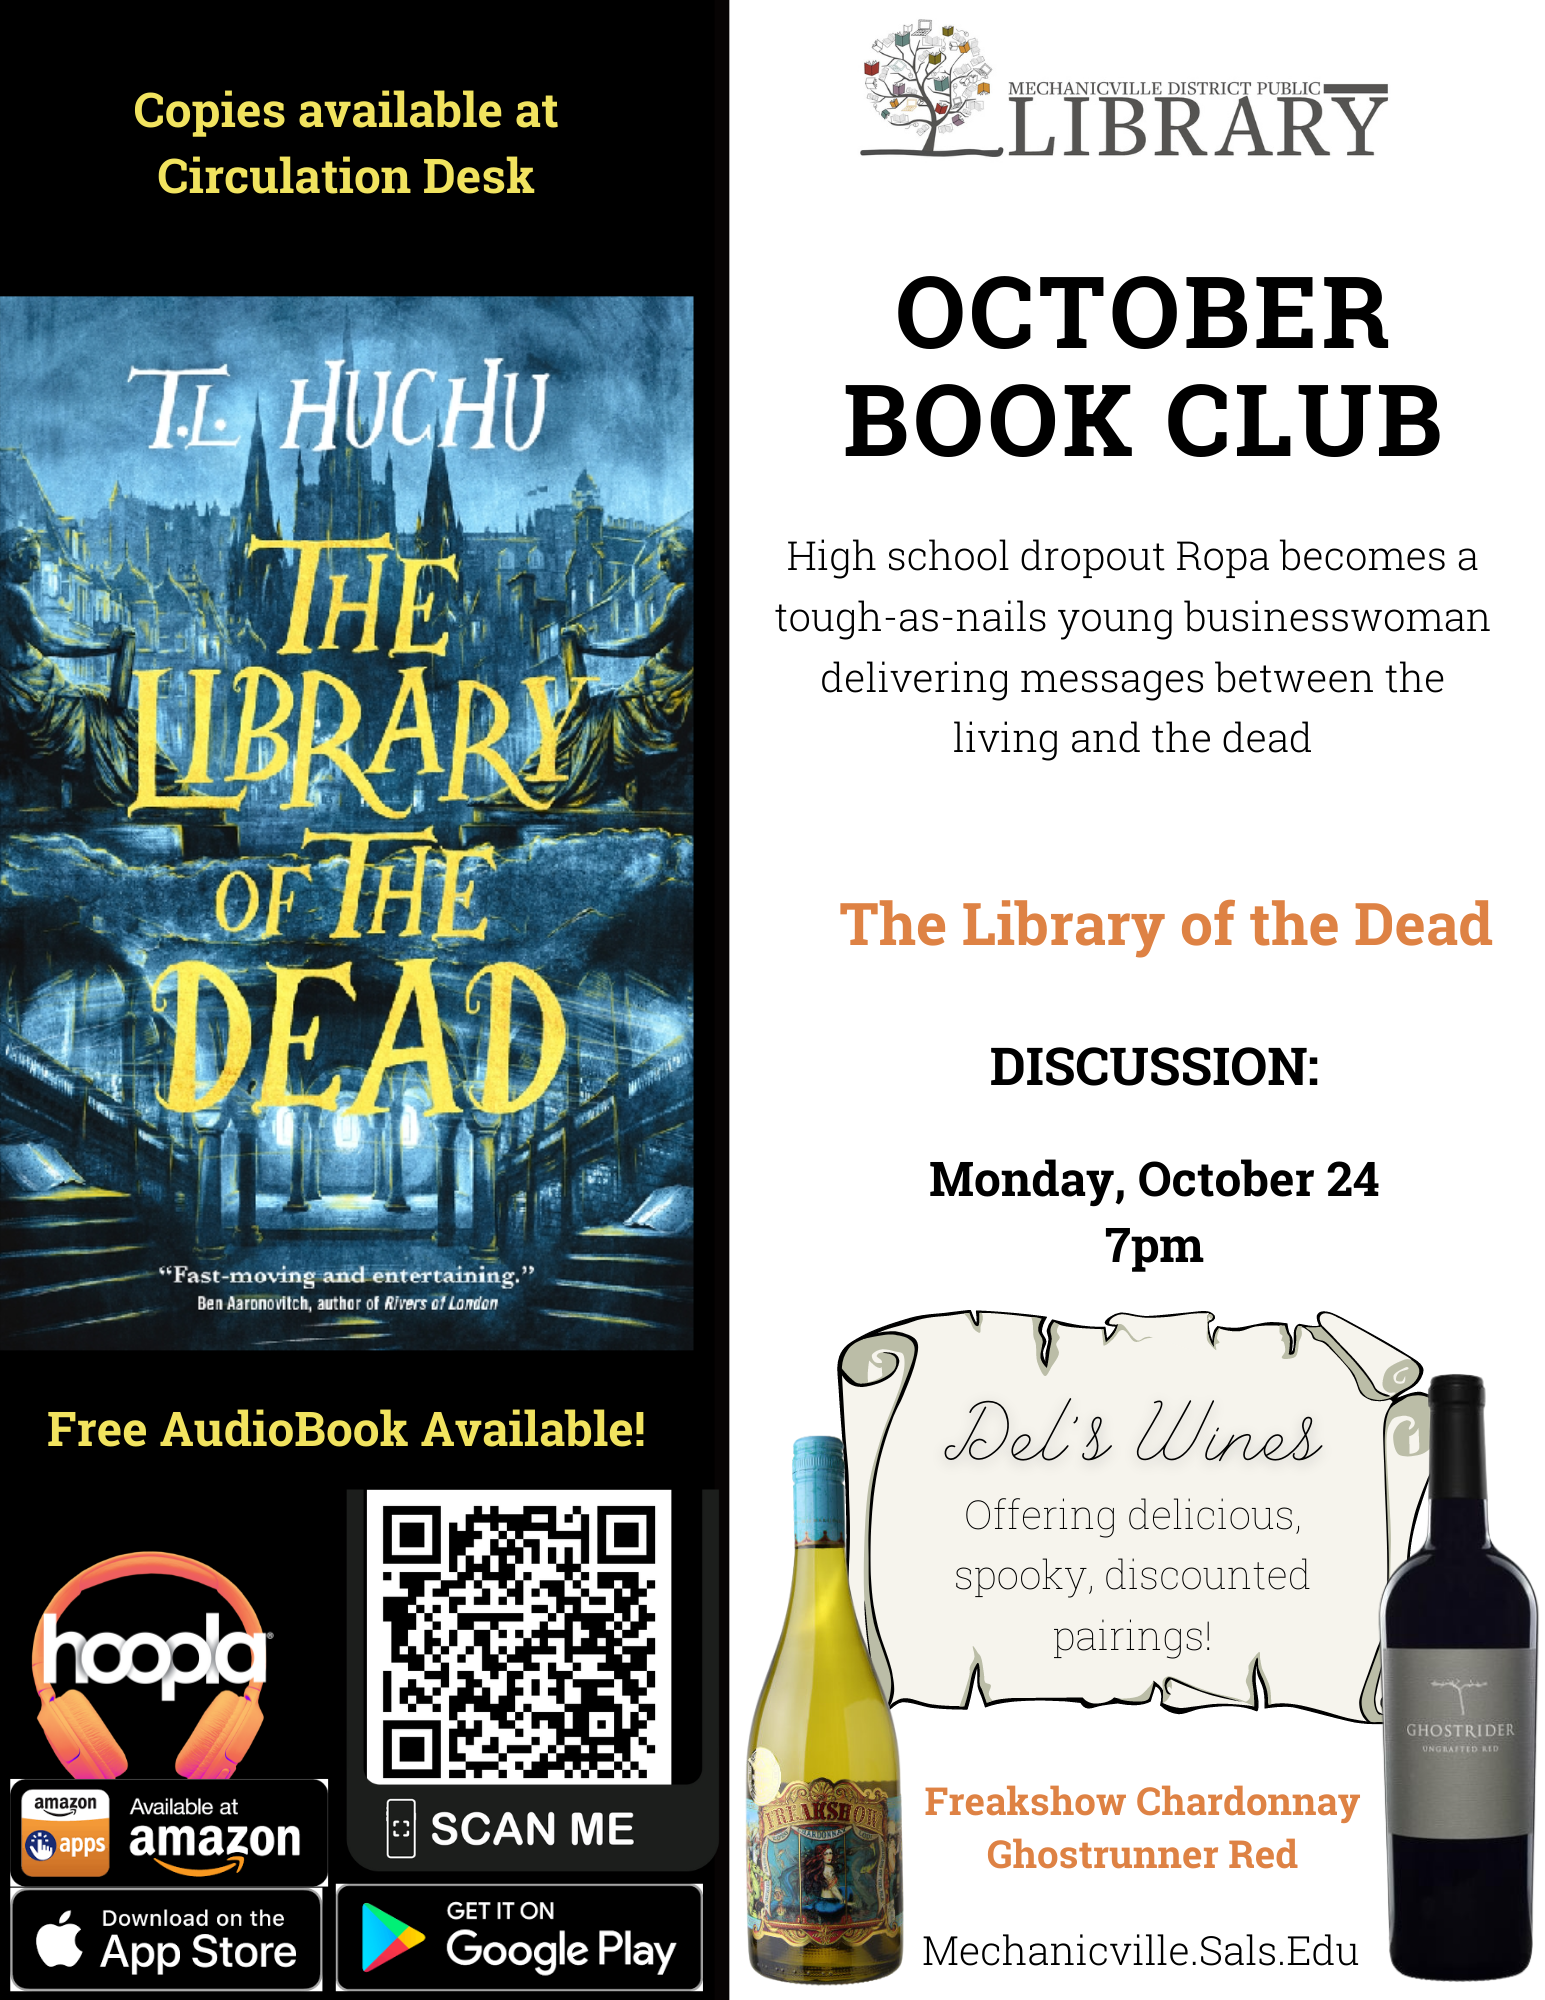 Book Club: The Library of the Dead